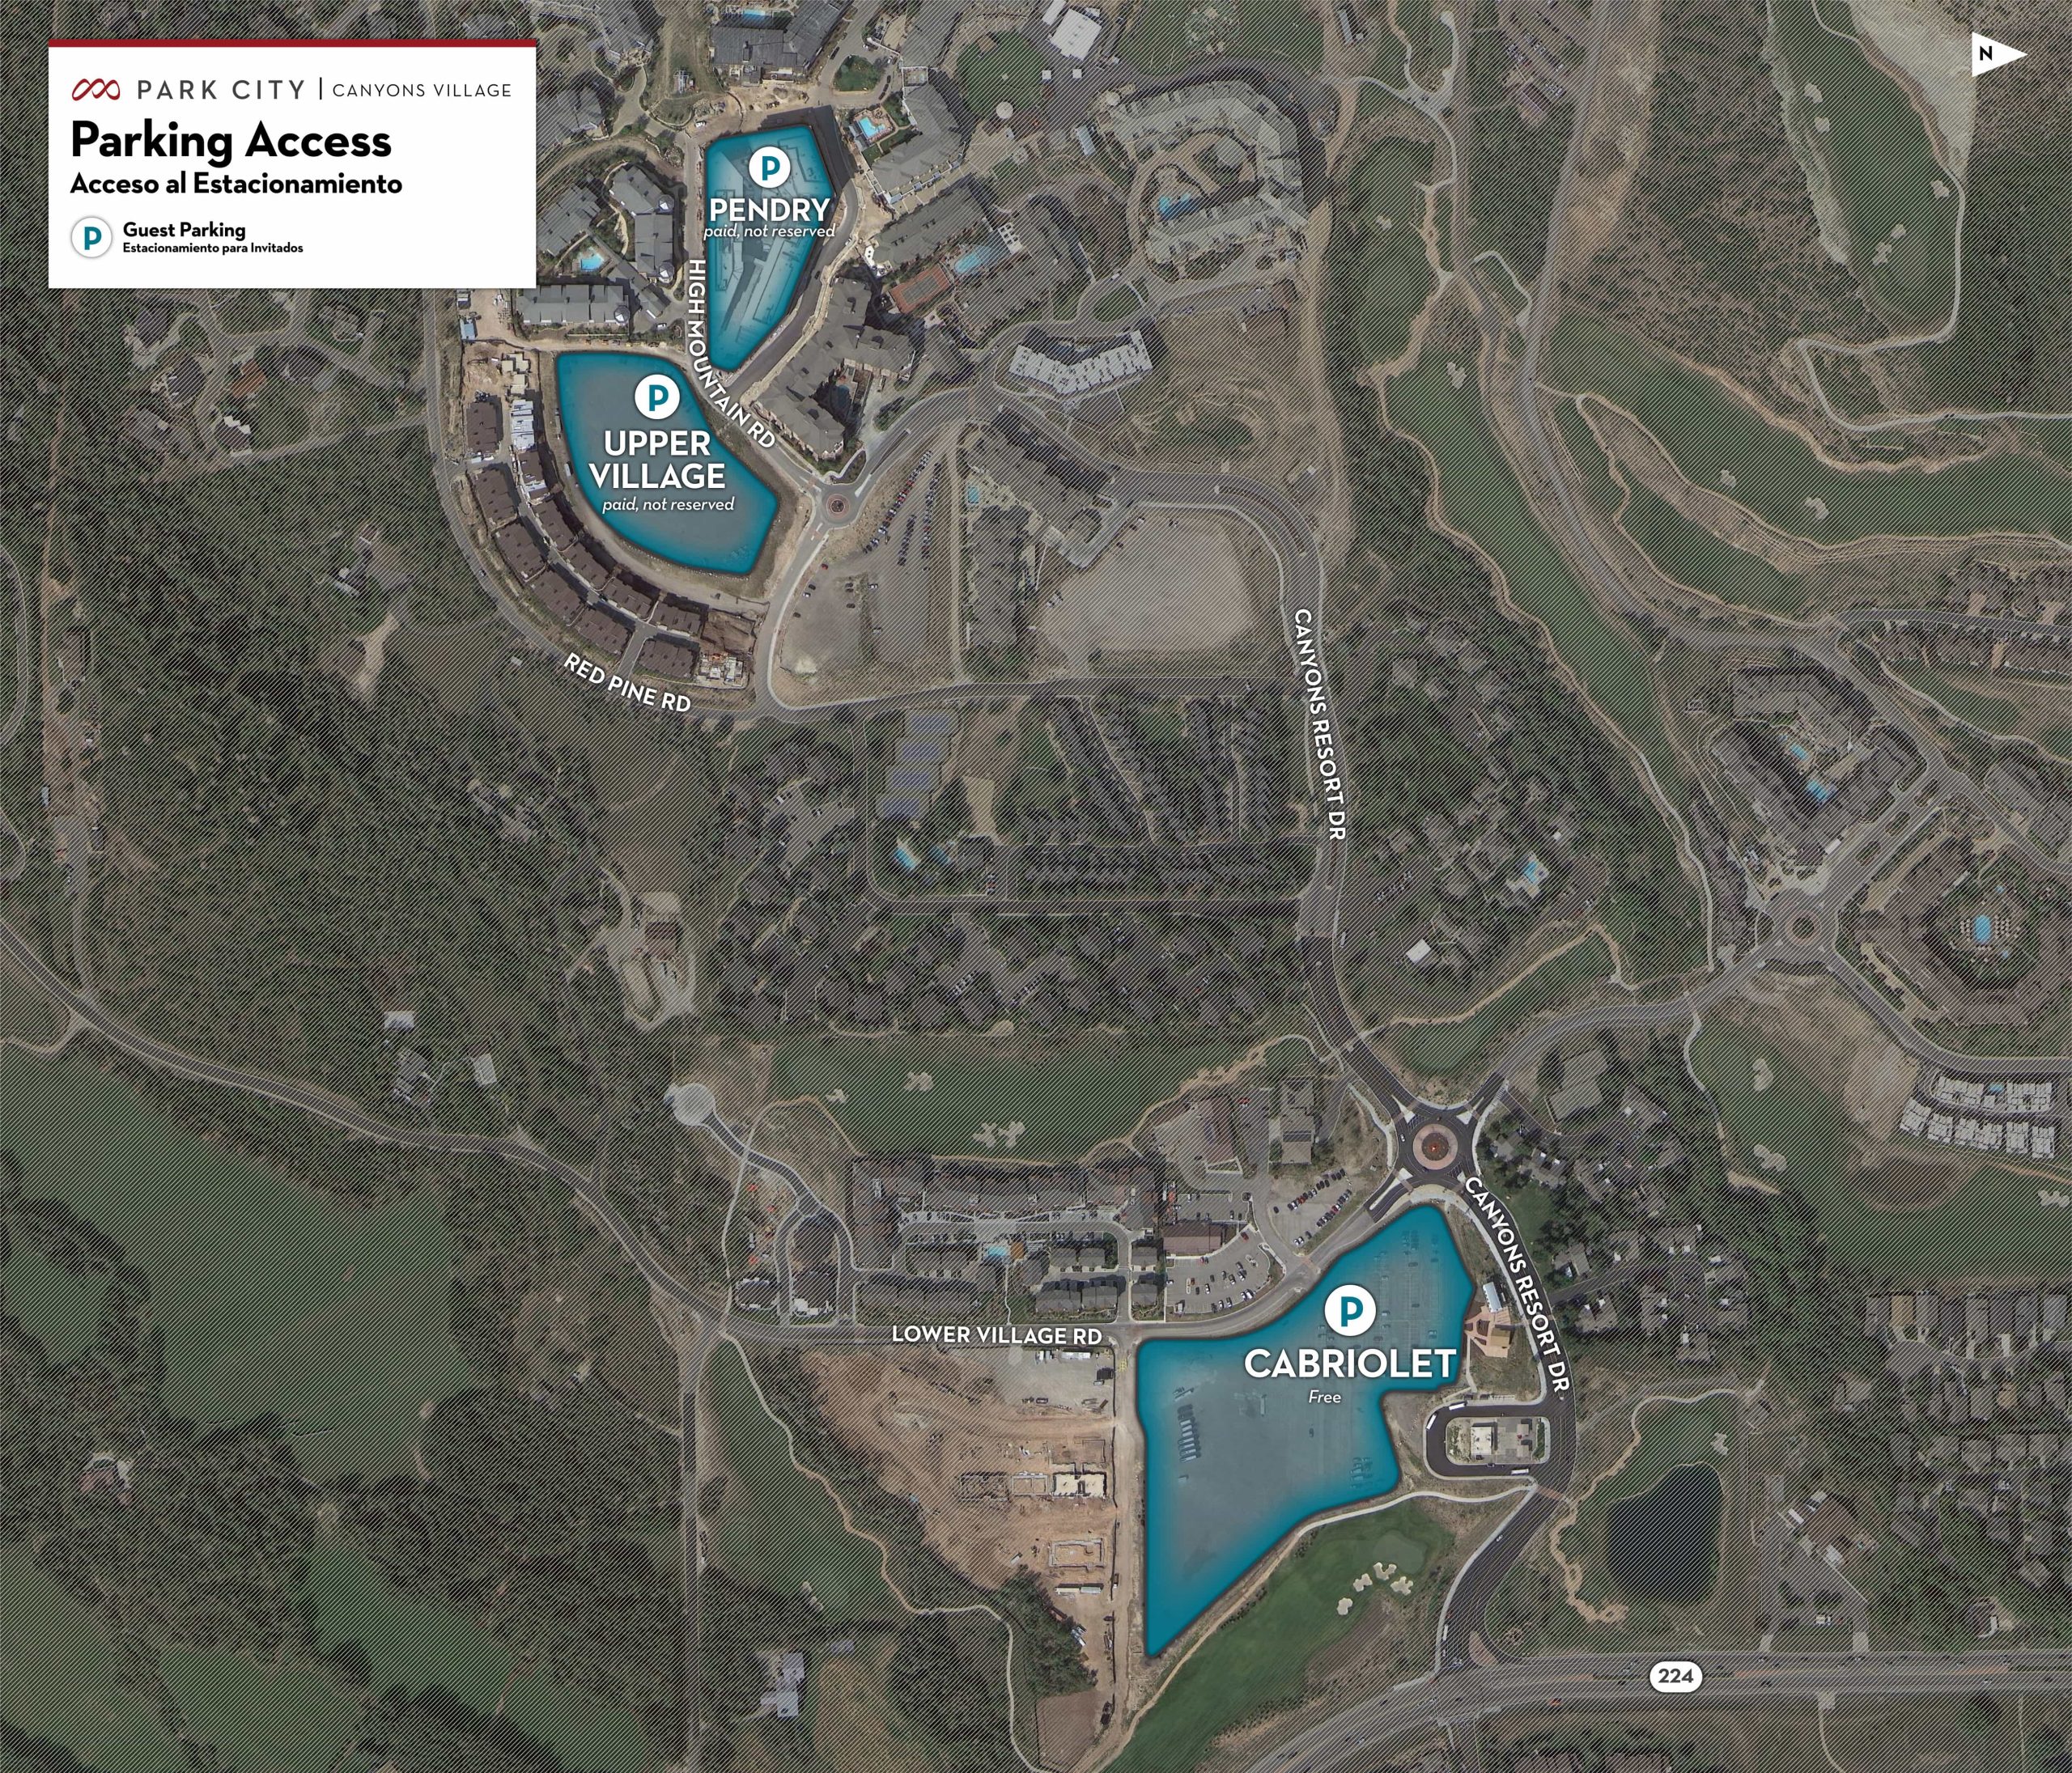 Canyons Village parking map